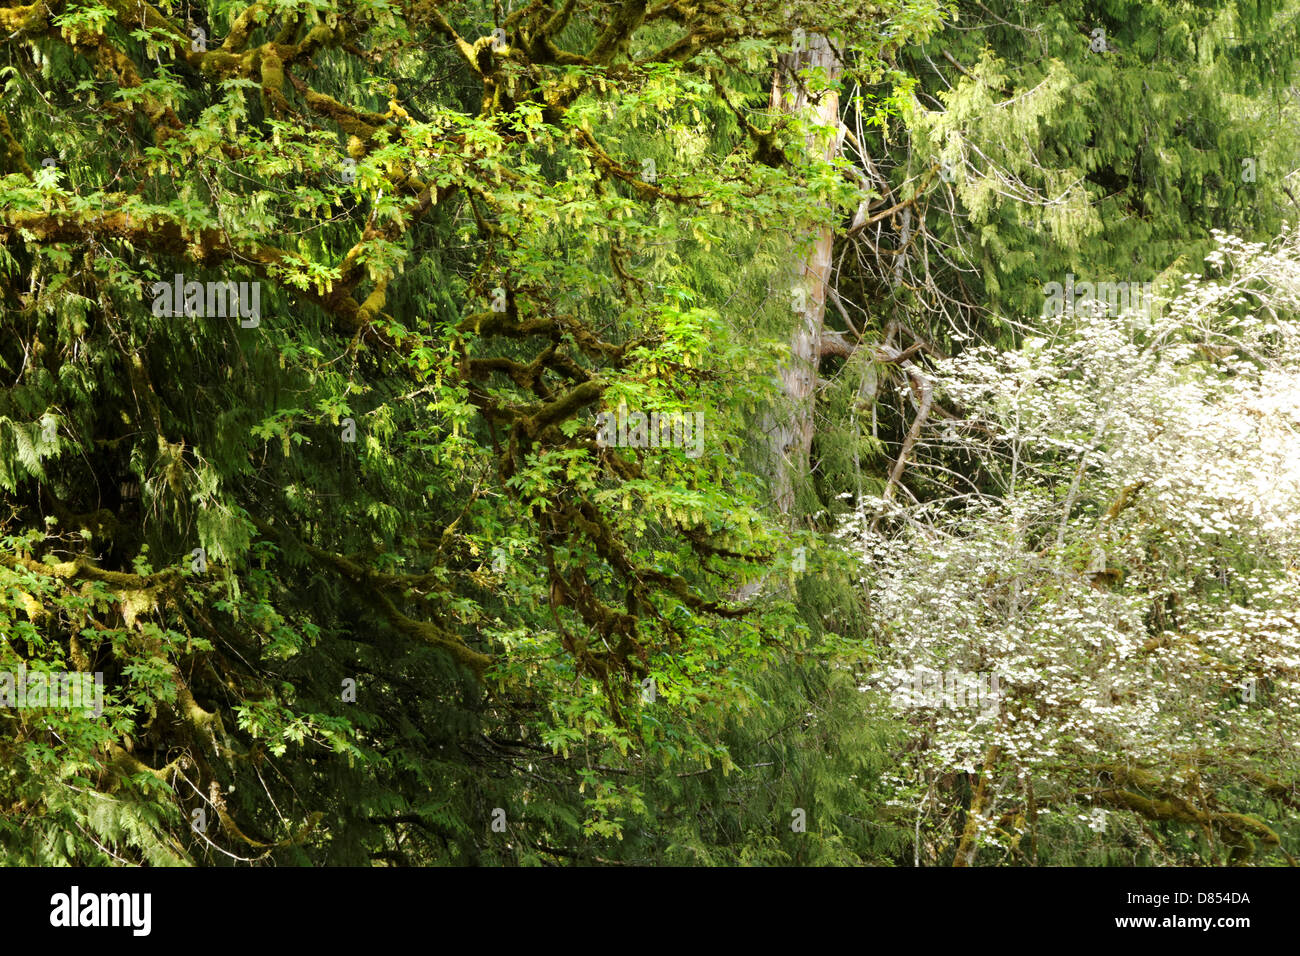 41,389.08947 Forest wall of tree branches trunk white dogwood flowers green leaves deciduous and conifers Stock Photo